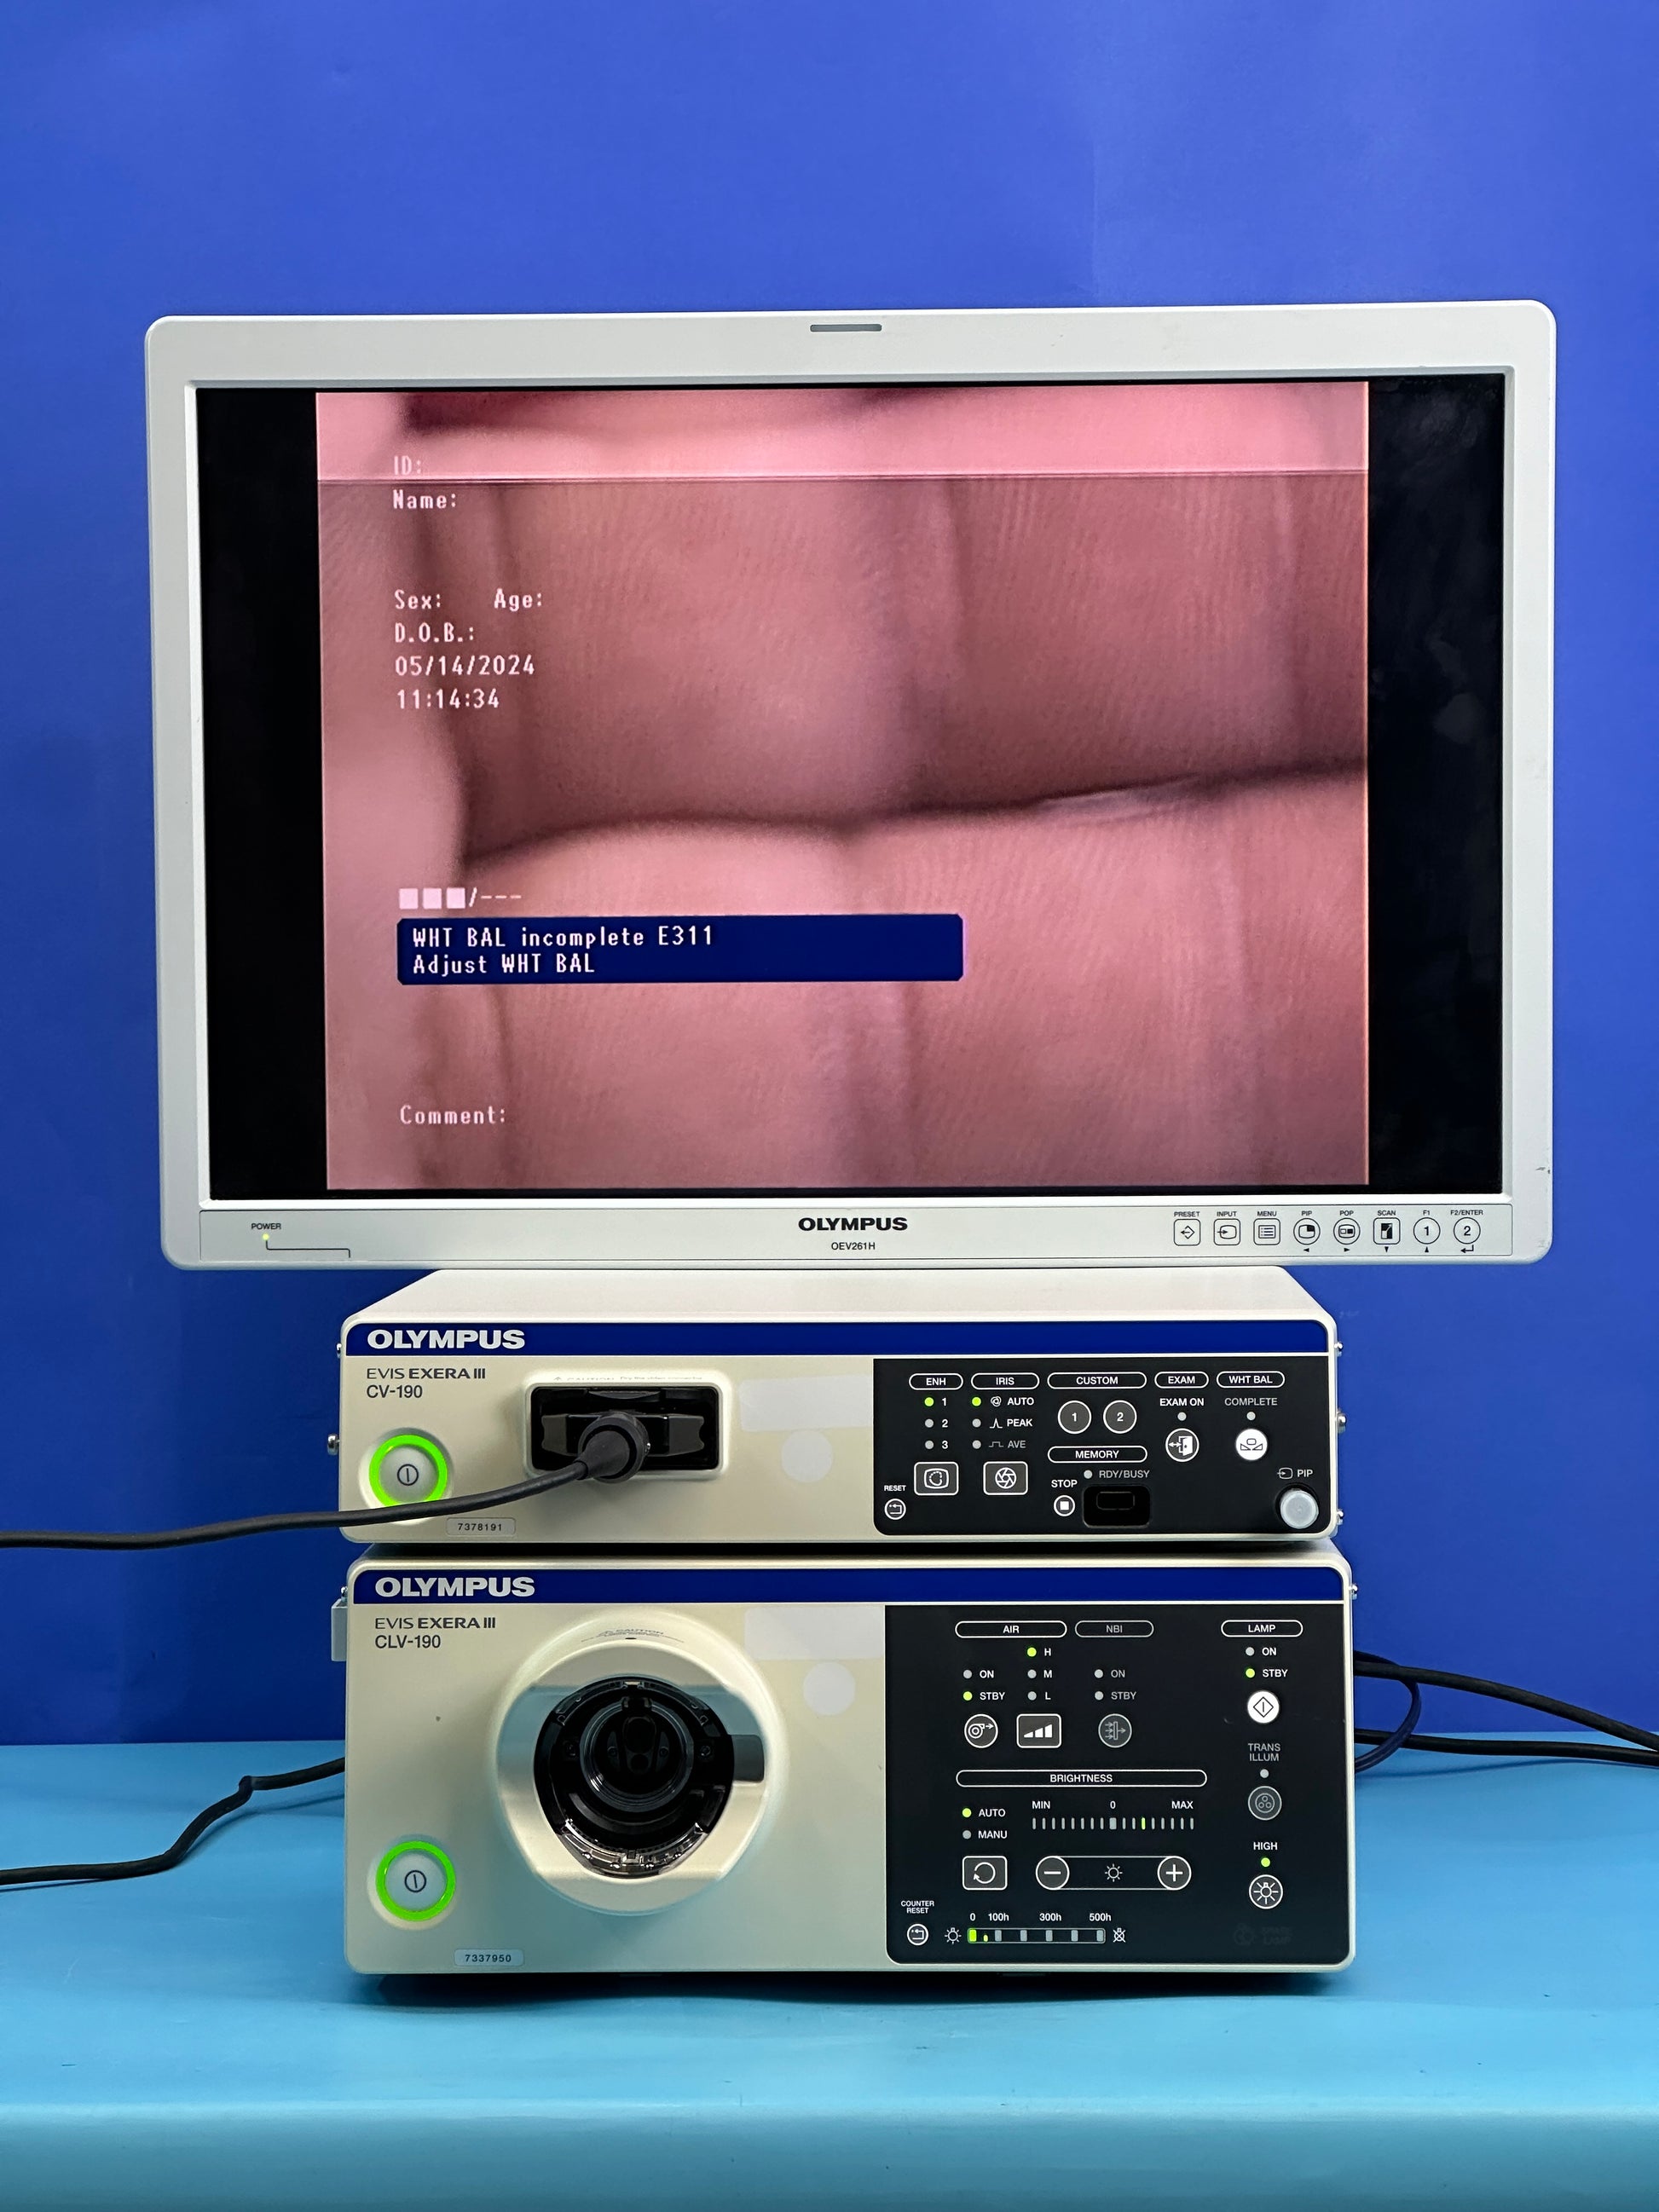 Olympus CV-190 with CLV-190 EVIS EXERA III Video Endoscopy System, Olympus OEV-261H is a 26” LCD monitor able to display full High Definition (HD) images and has been designed specifically for use with Olympus endoscopy systems